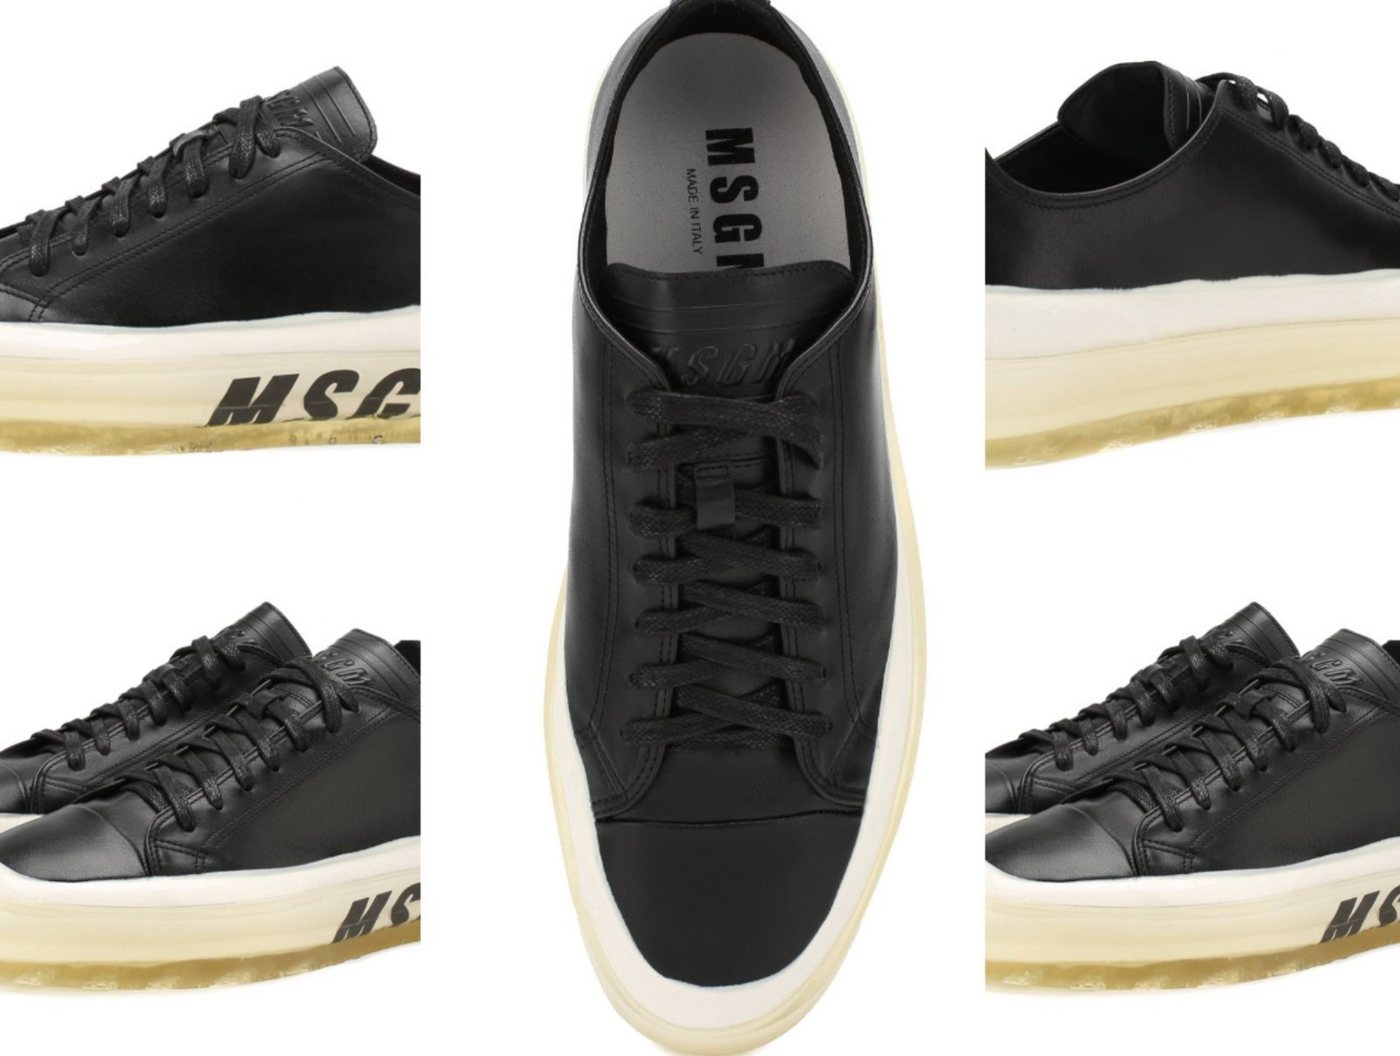 MSGM MSGM Dipped Sole Edition Floating Sneakers Trainers Turnschuhe Shoes S Sneaker von MSGM